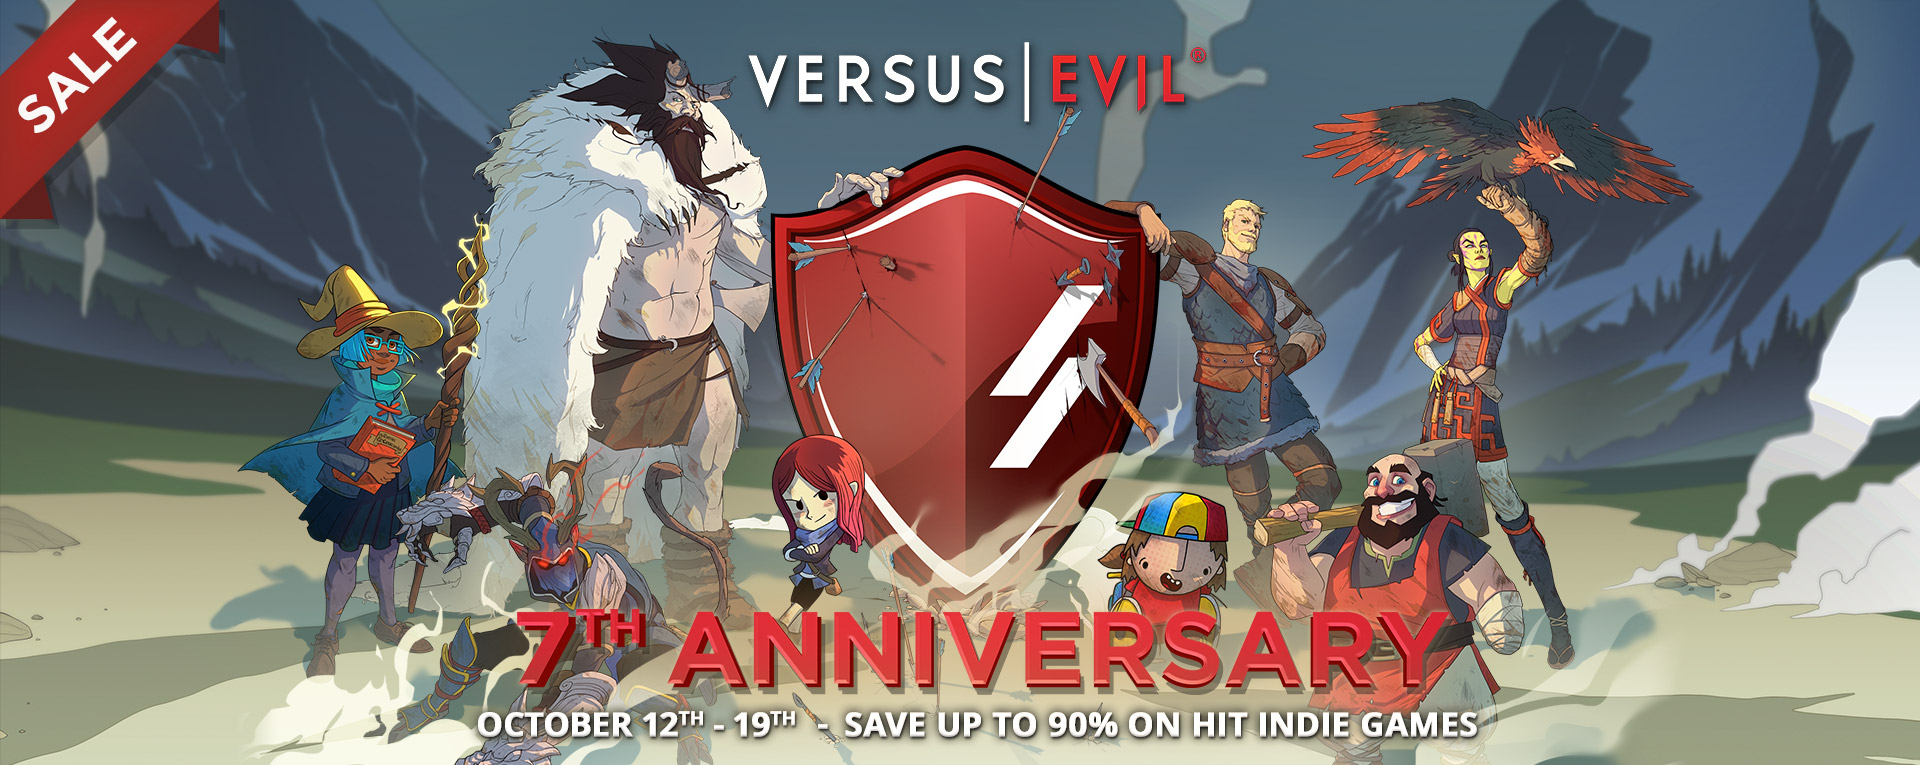 Welcome to the Versus Evil 7th Anniversary Sale